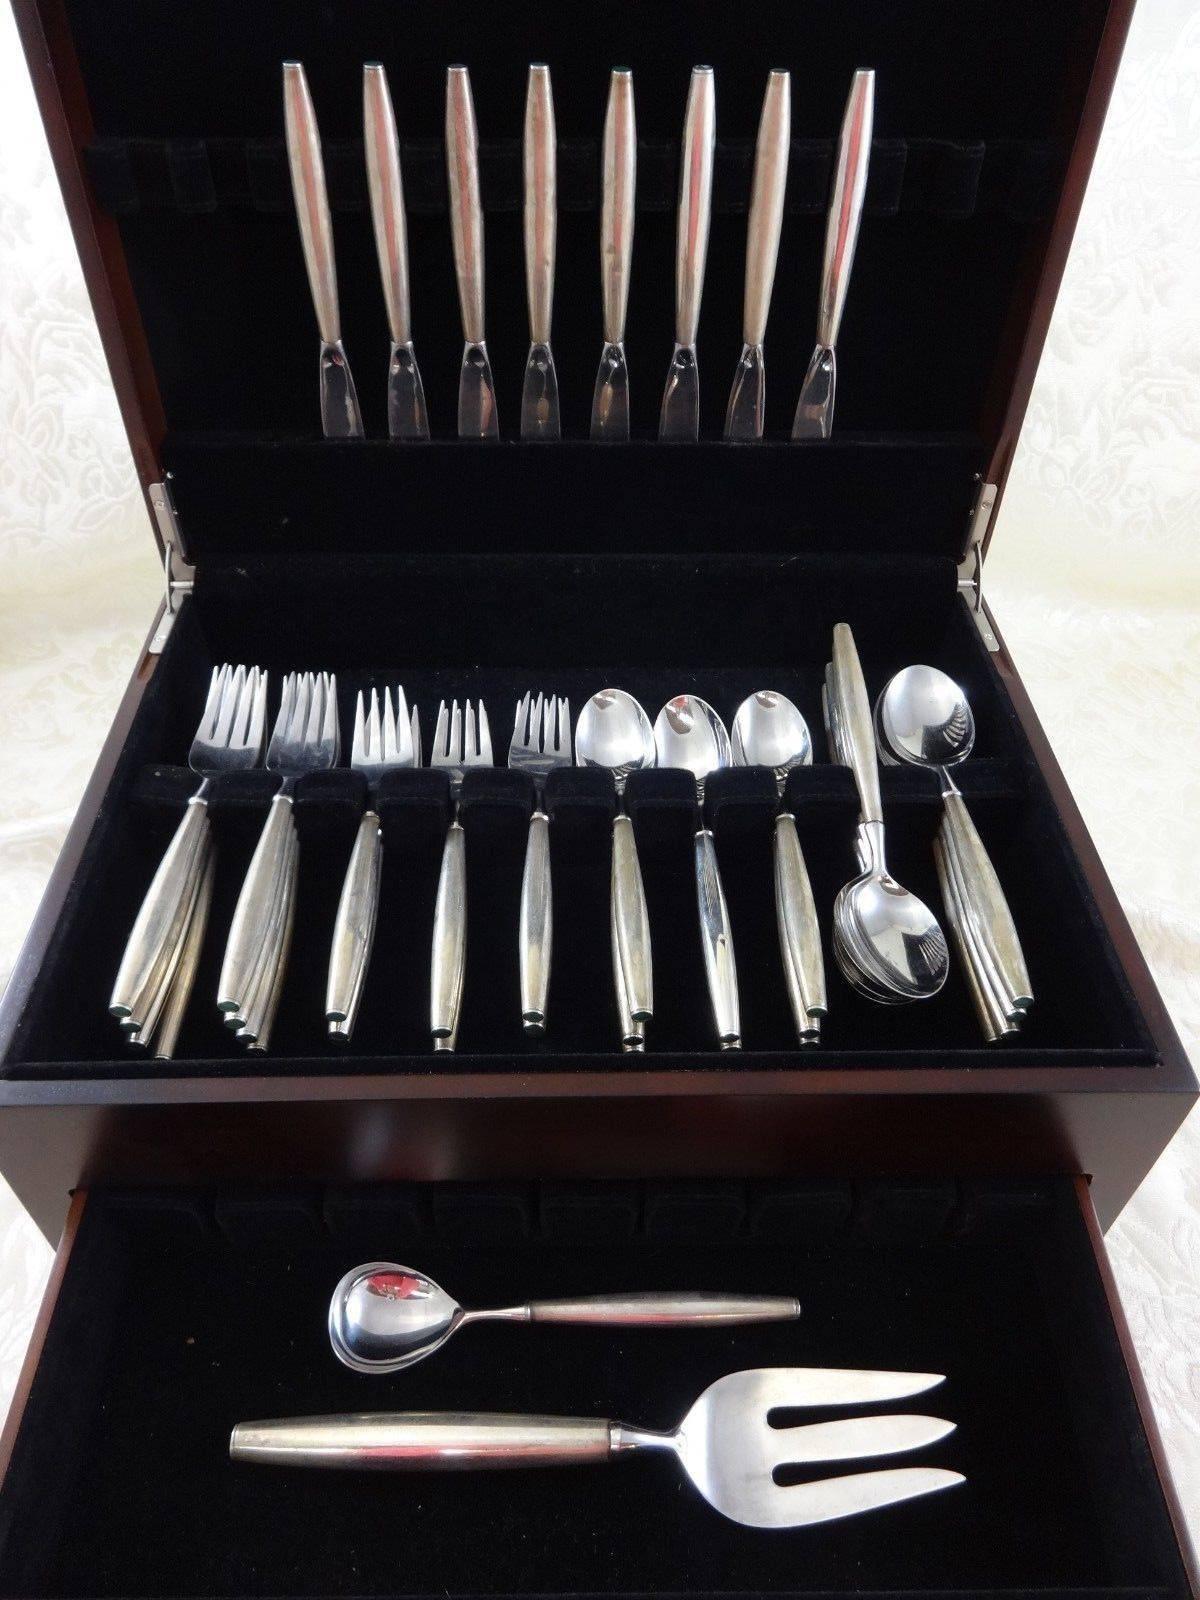 Jade plain by Contempra House (division of Towle) sterling silver flatware set of 42 pieces. This pattern was designed by noted Modernist midcentury designer, Earl Pardon, in the year 1955. This unique modernism pattern features hollow handles with